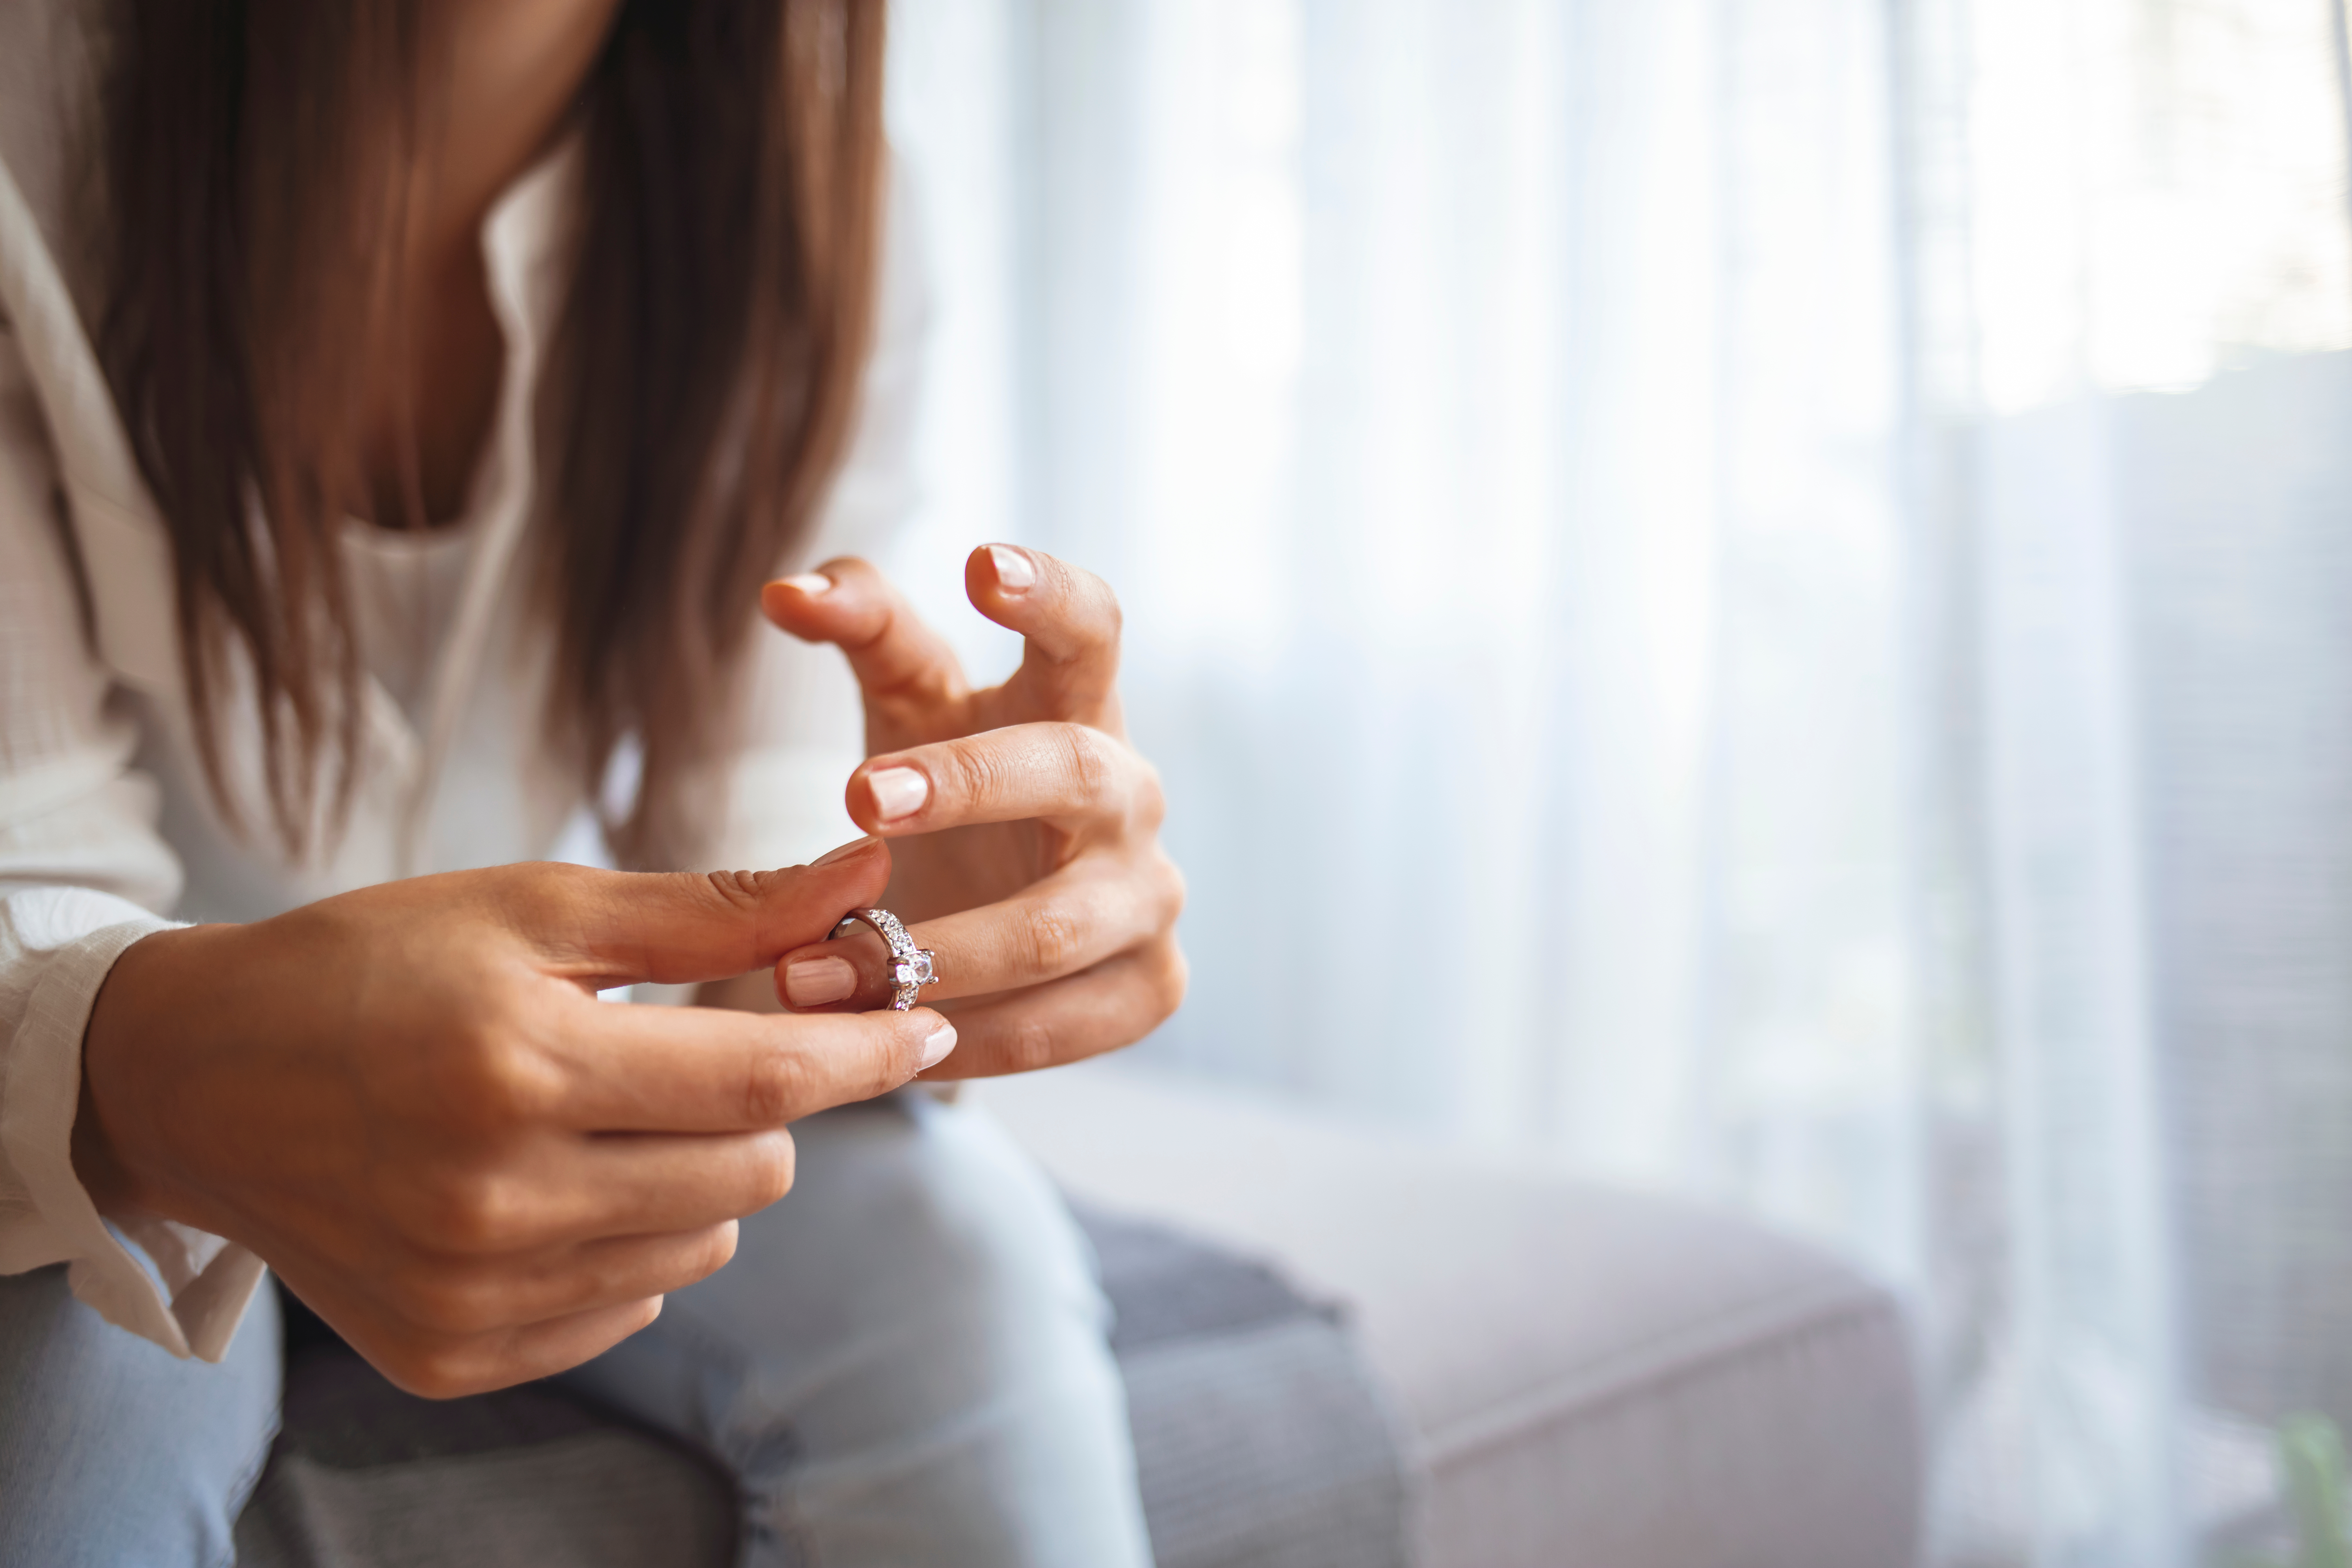 A woman taking off her engagement ring | Source: Shutterstock